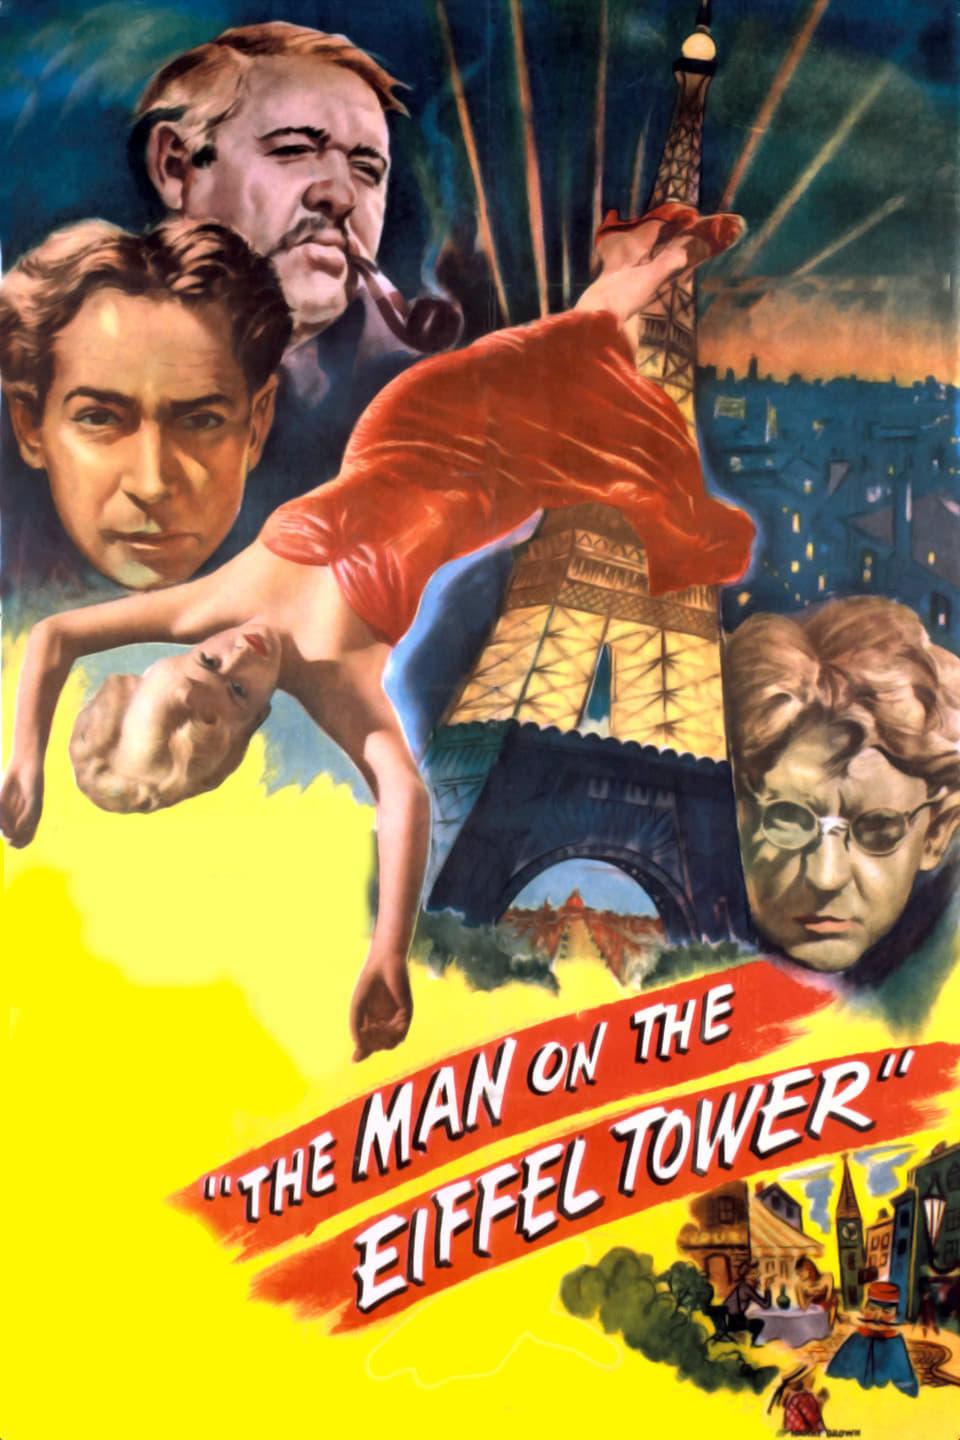 The Man on the Eiffel Tower poster